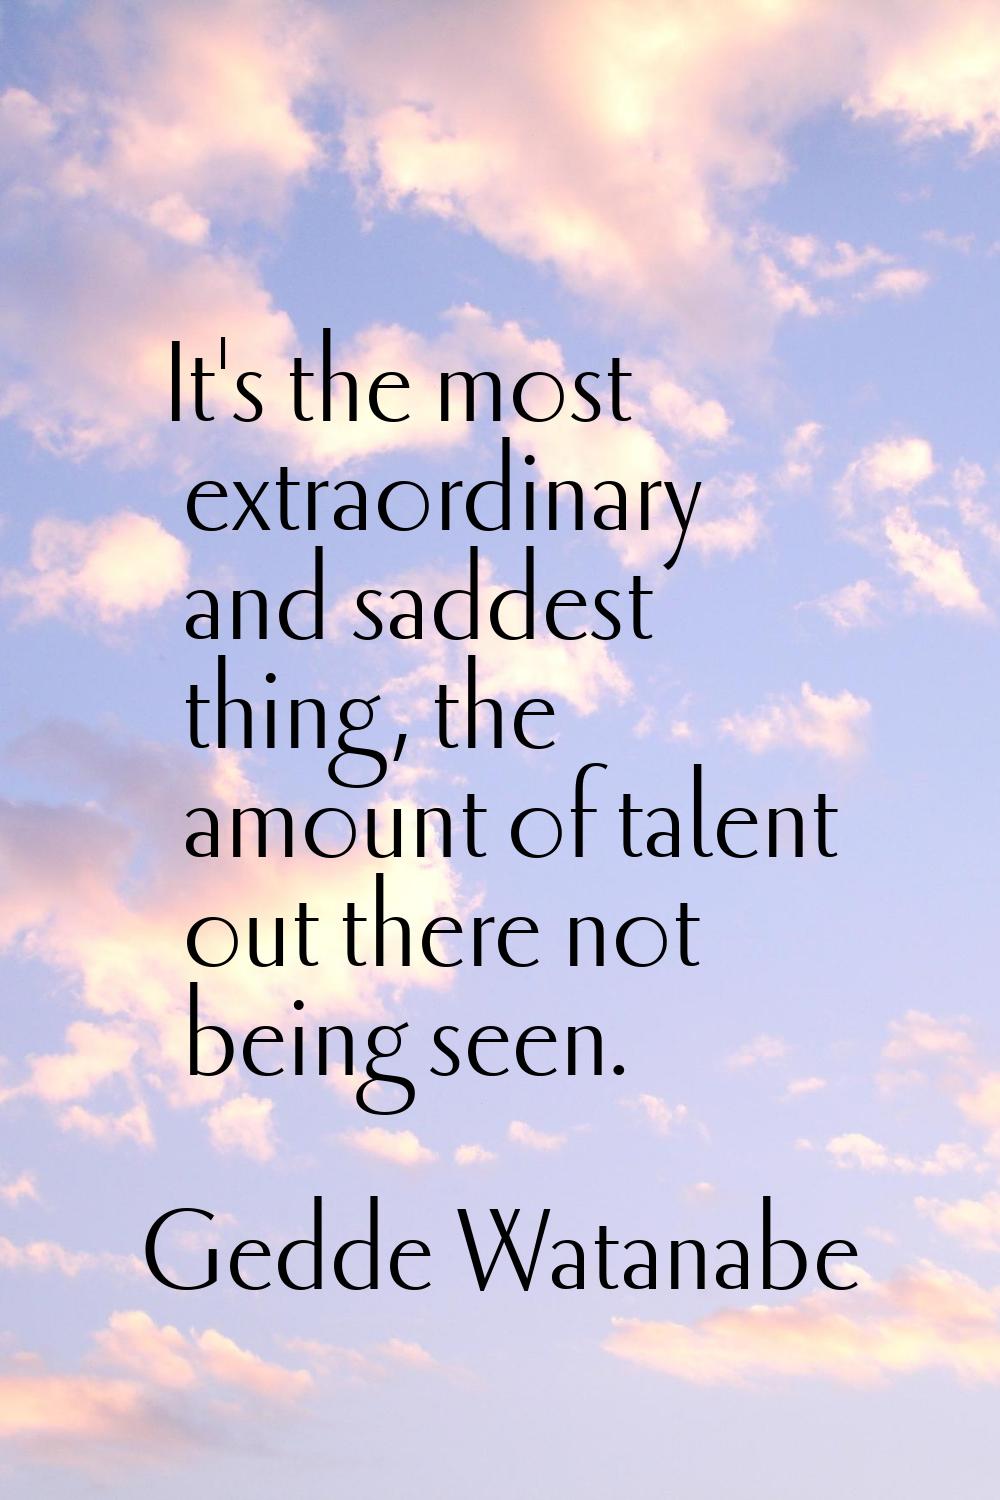 It's the most extraordinary and saddest thing, the amount of talent out there not being seen.